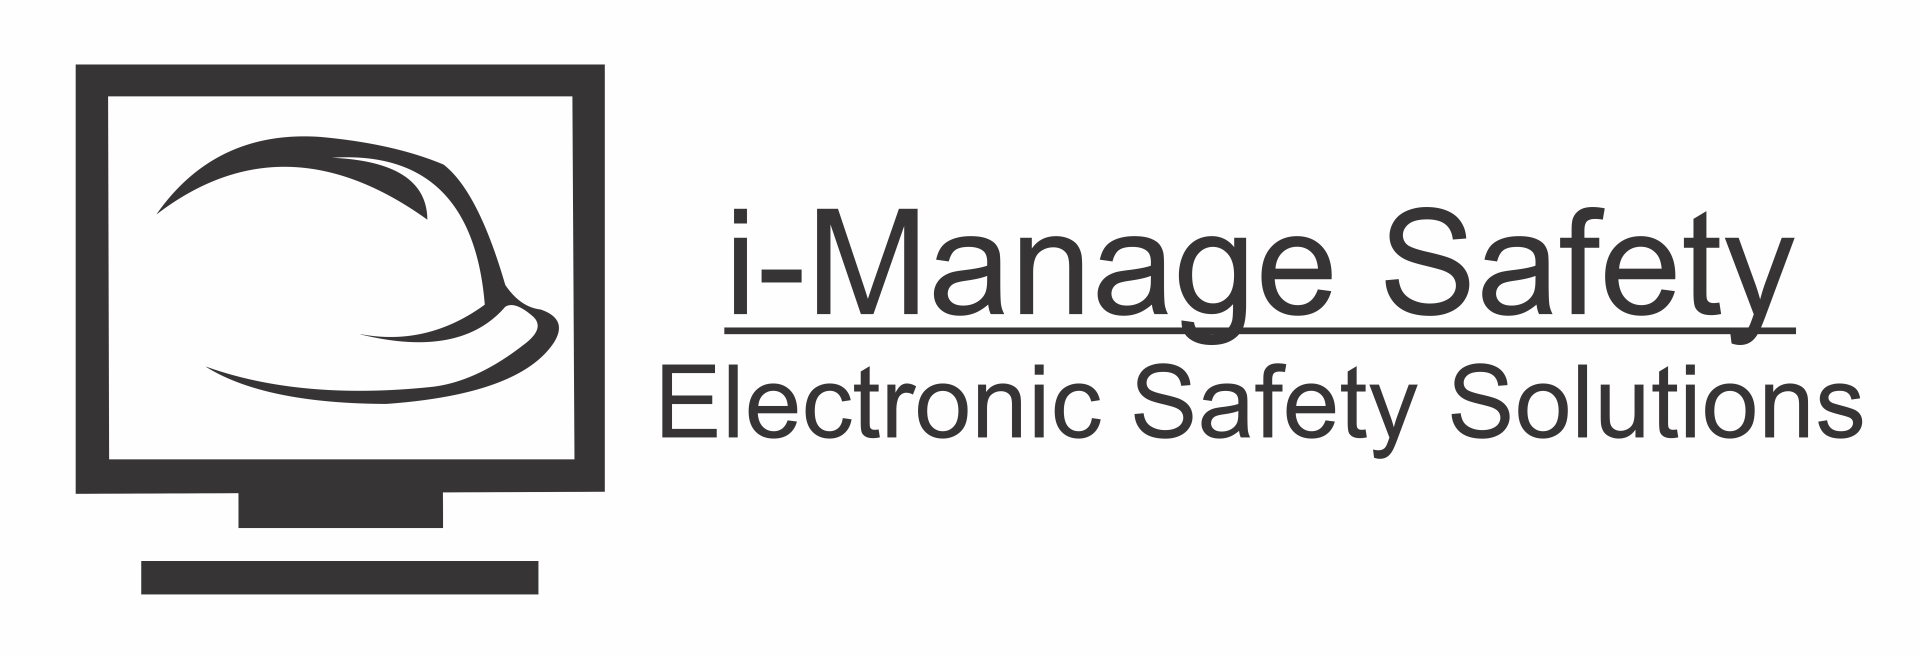 i-Manage Safety Electronic Safety Solutions